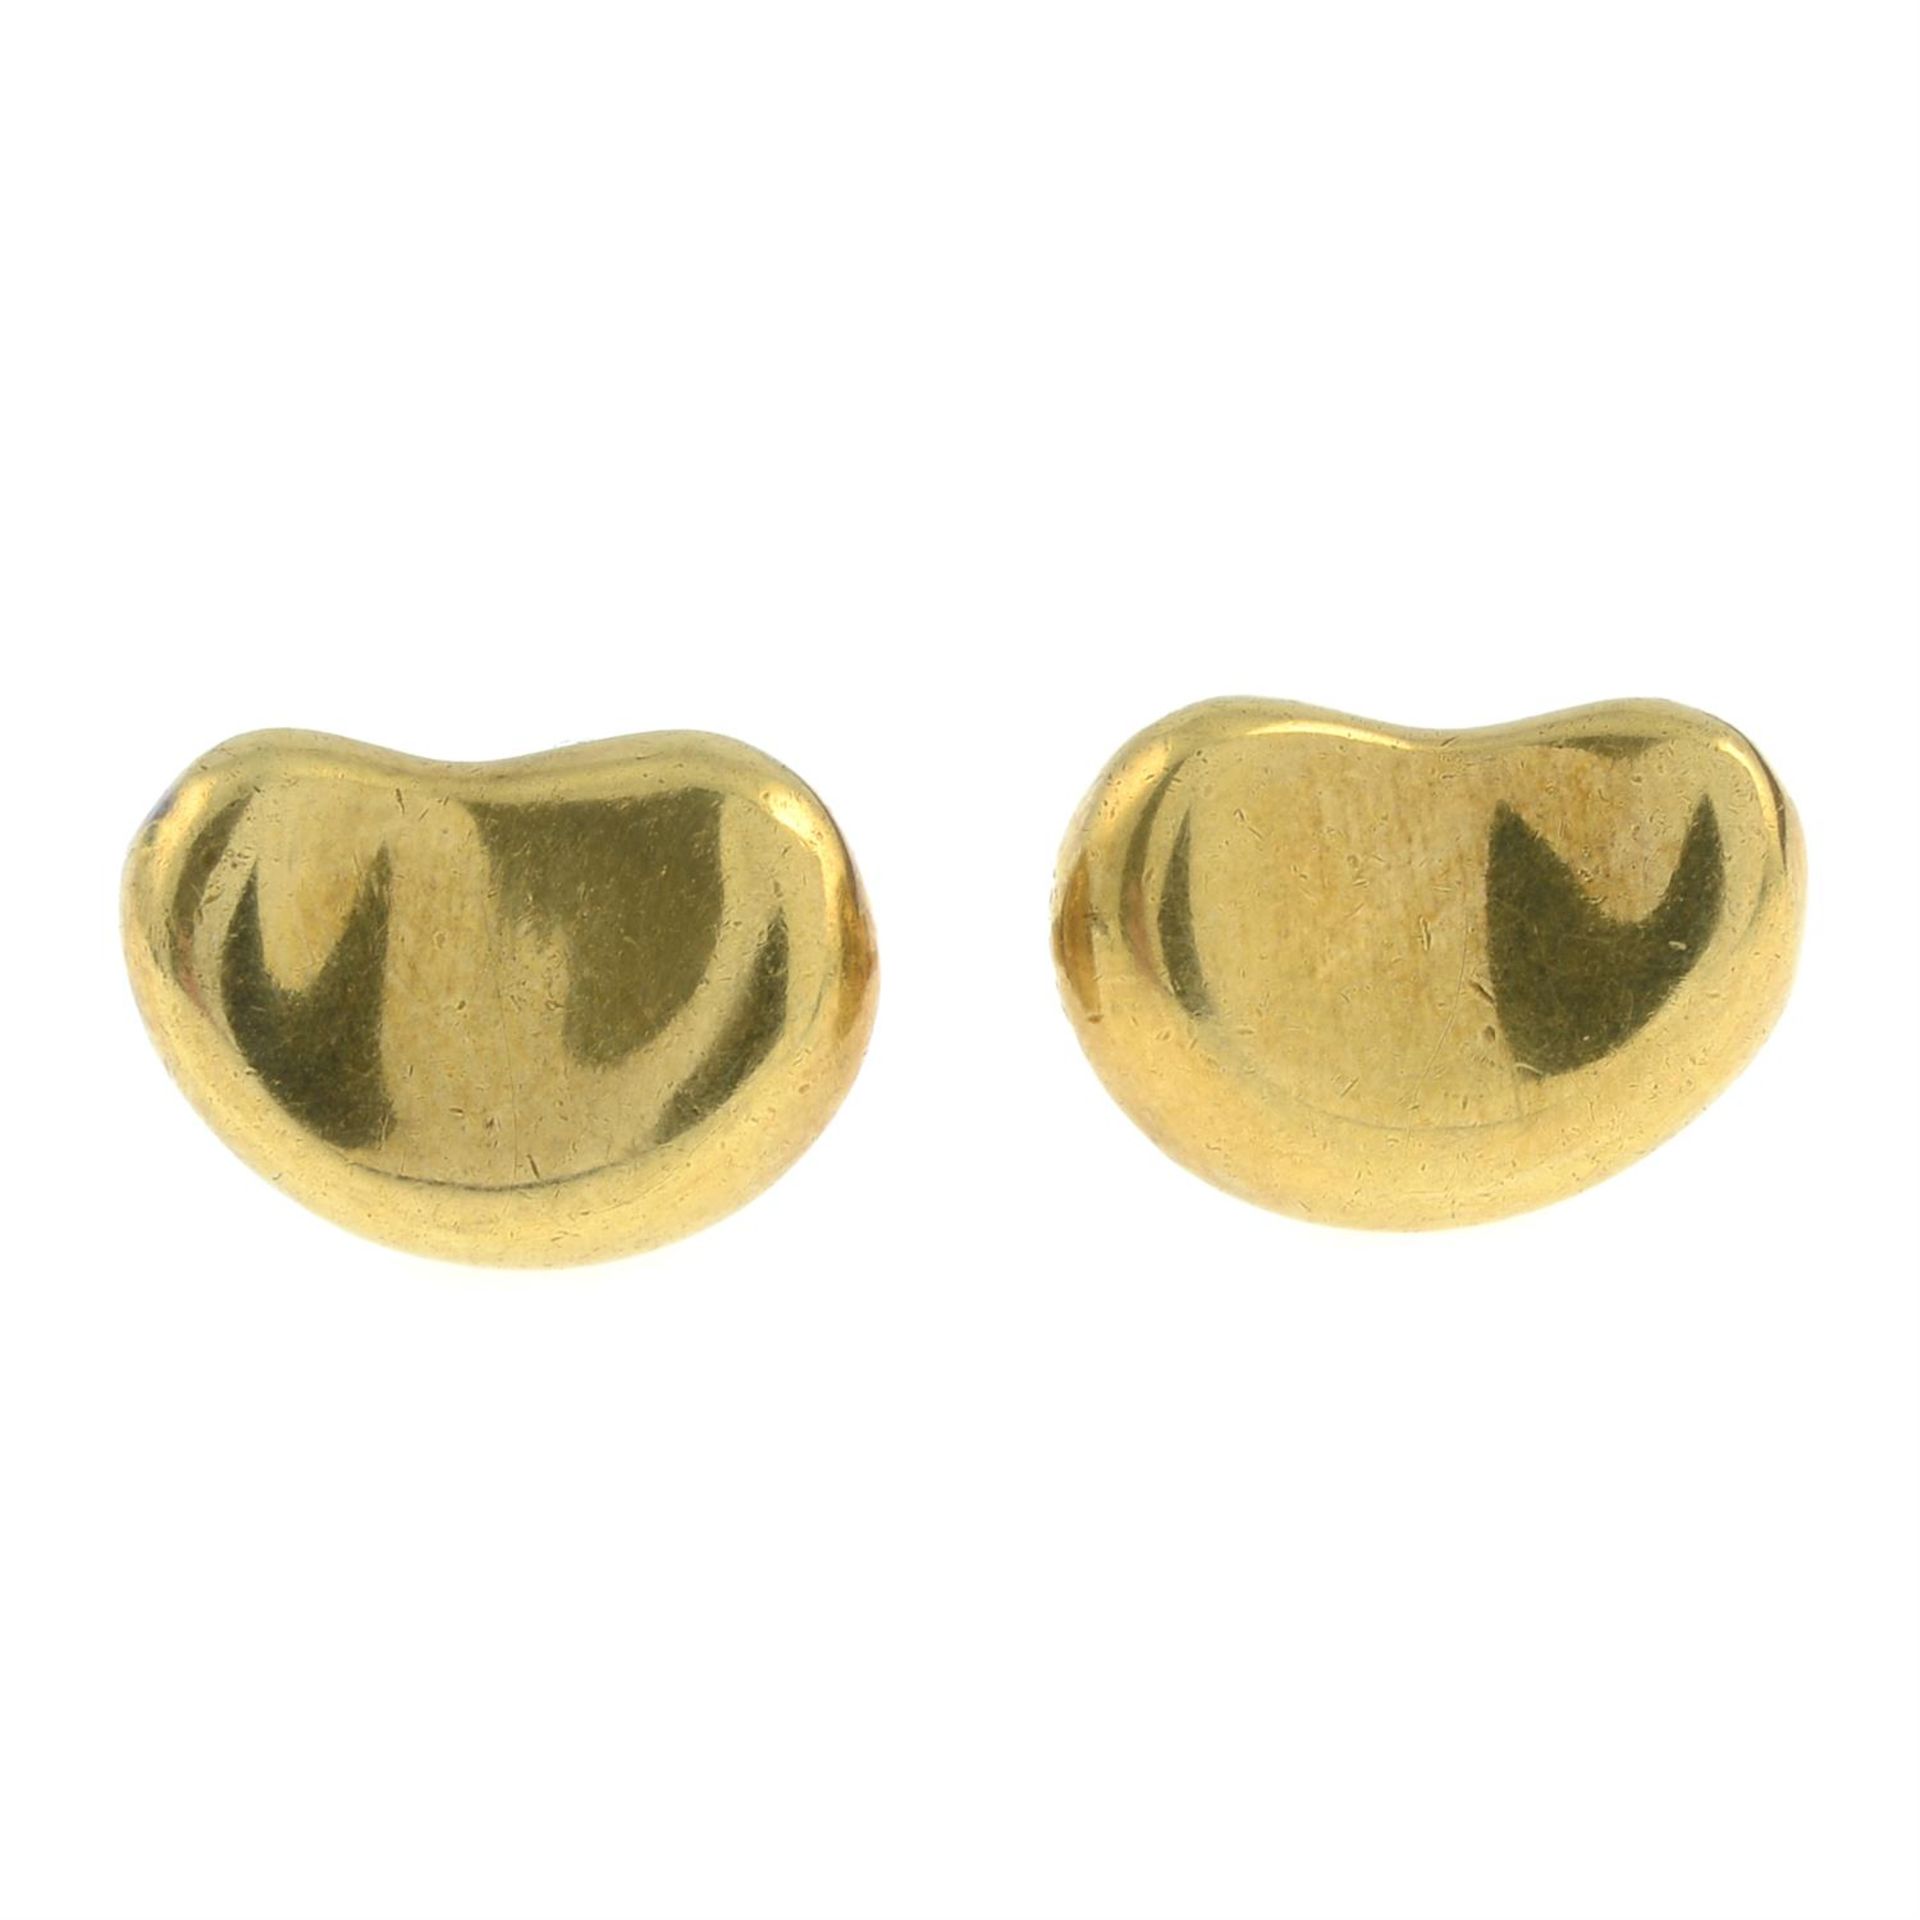 A pair of 'Bean' stud earrings, by Elsa Peretti for Tiffany & Co.